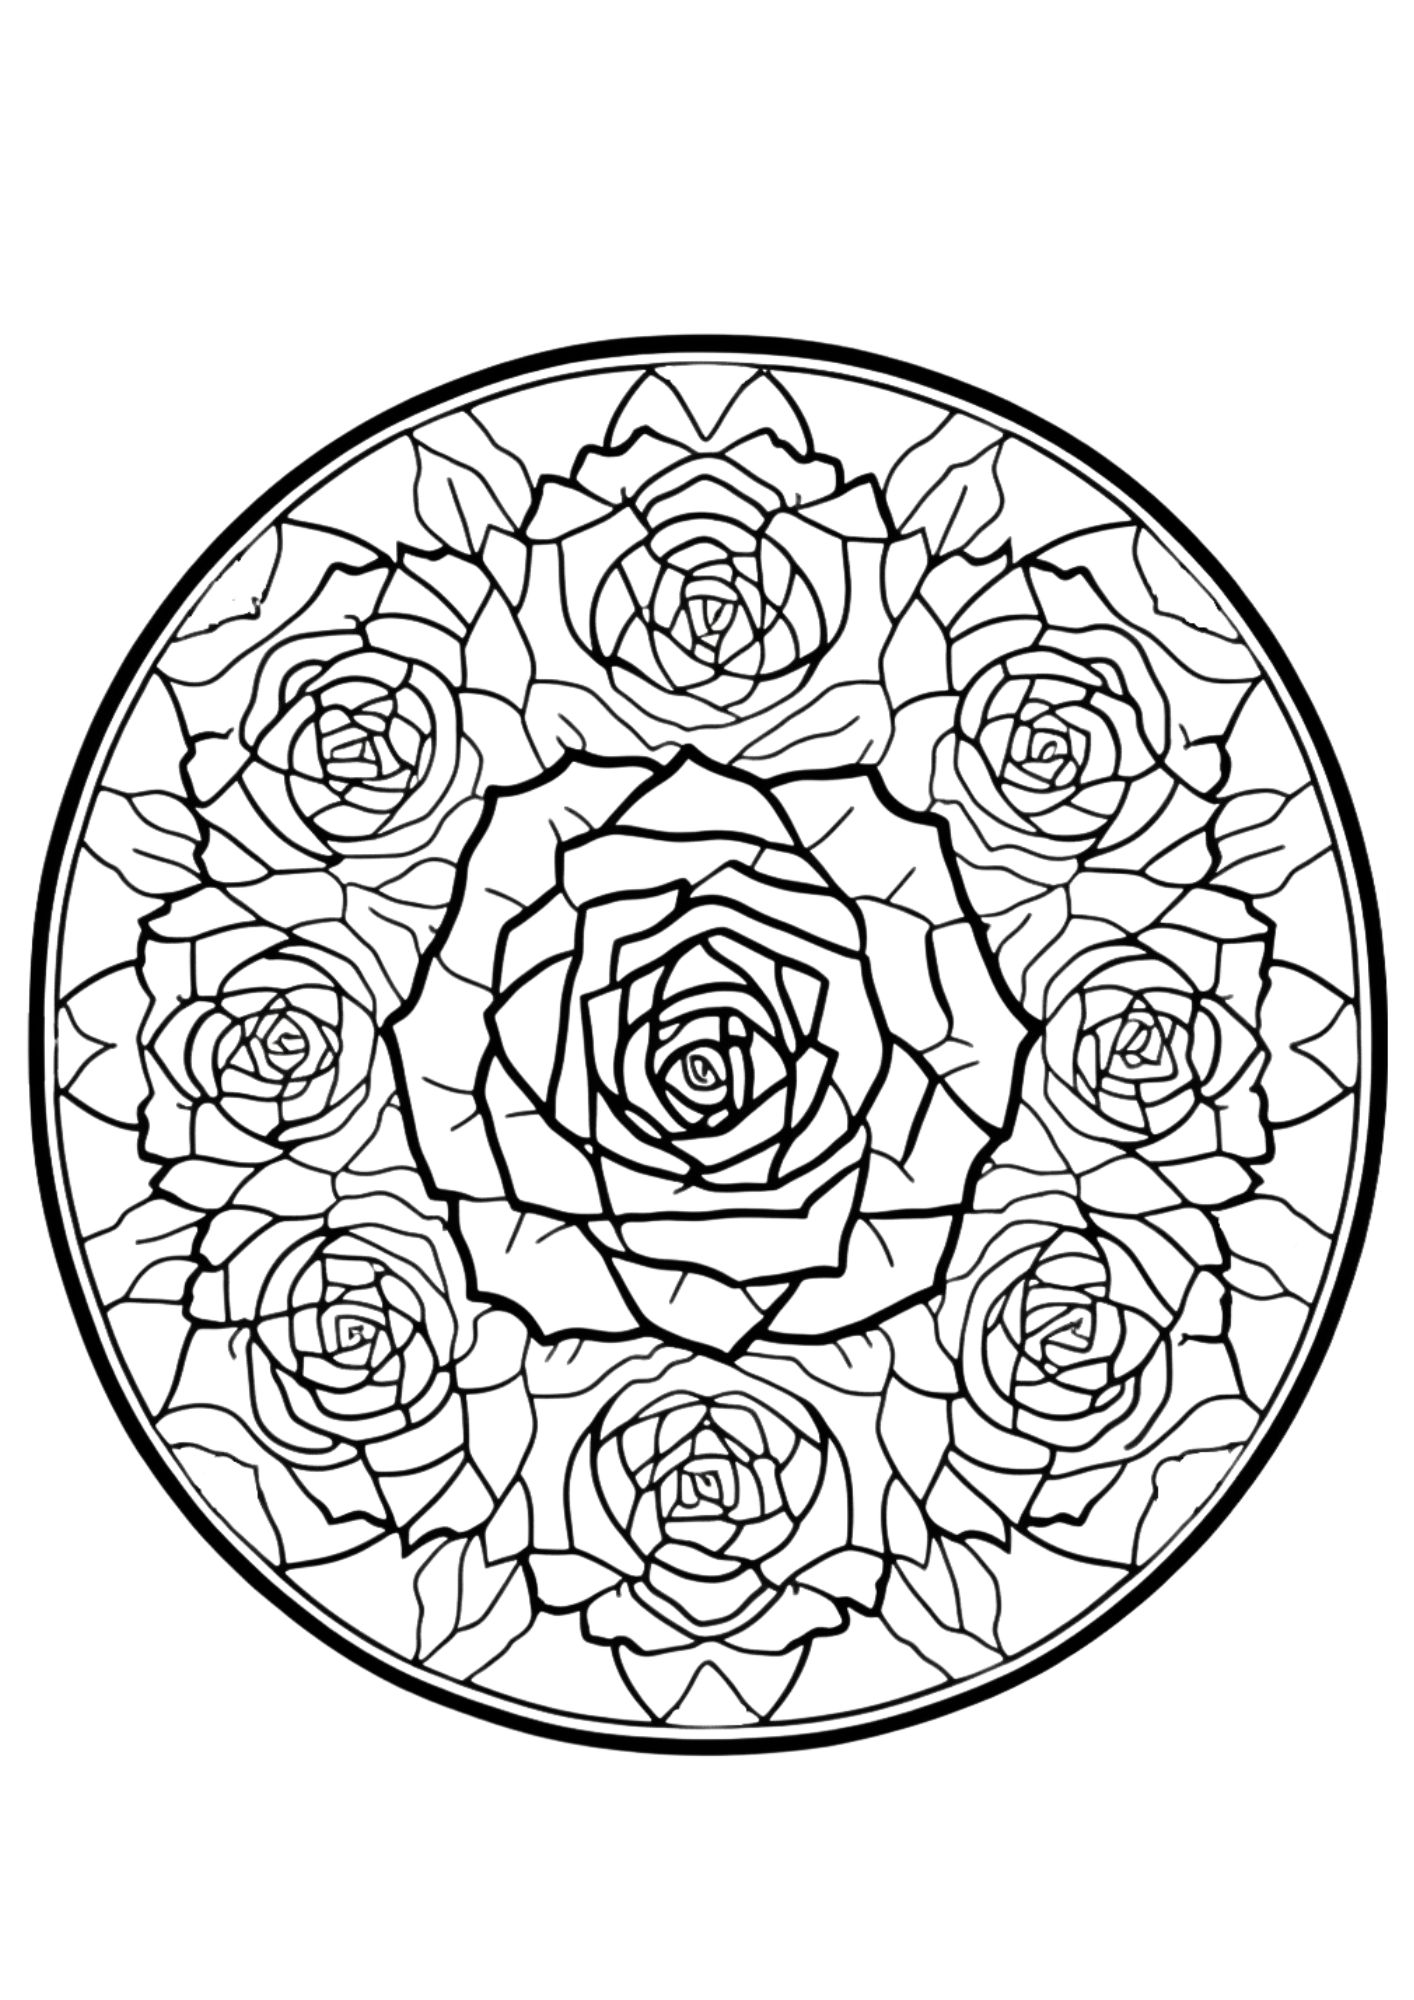 Free printable roses coloring pages for adults and kids